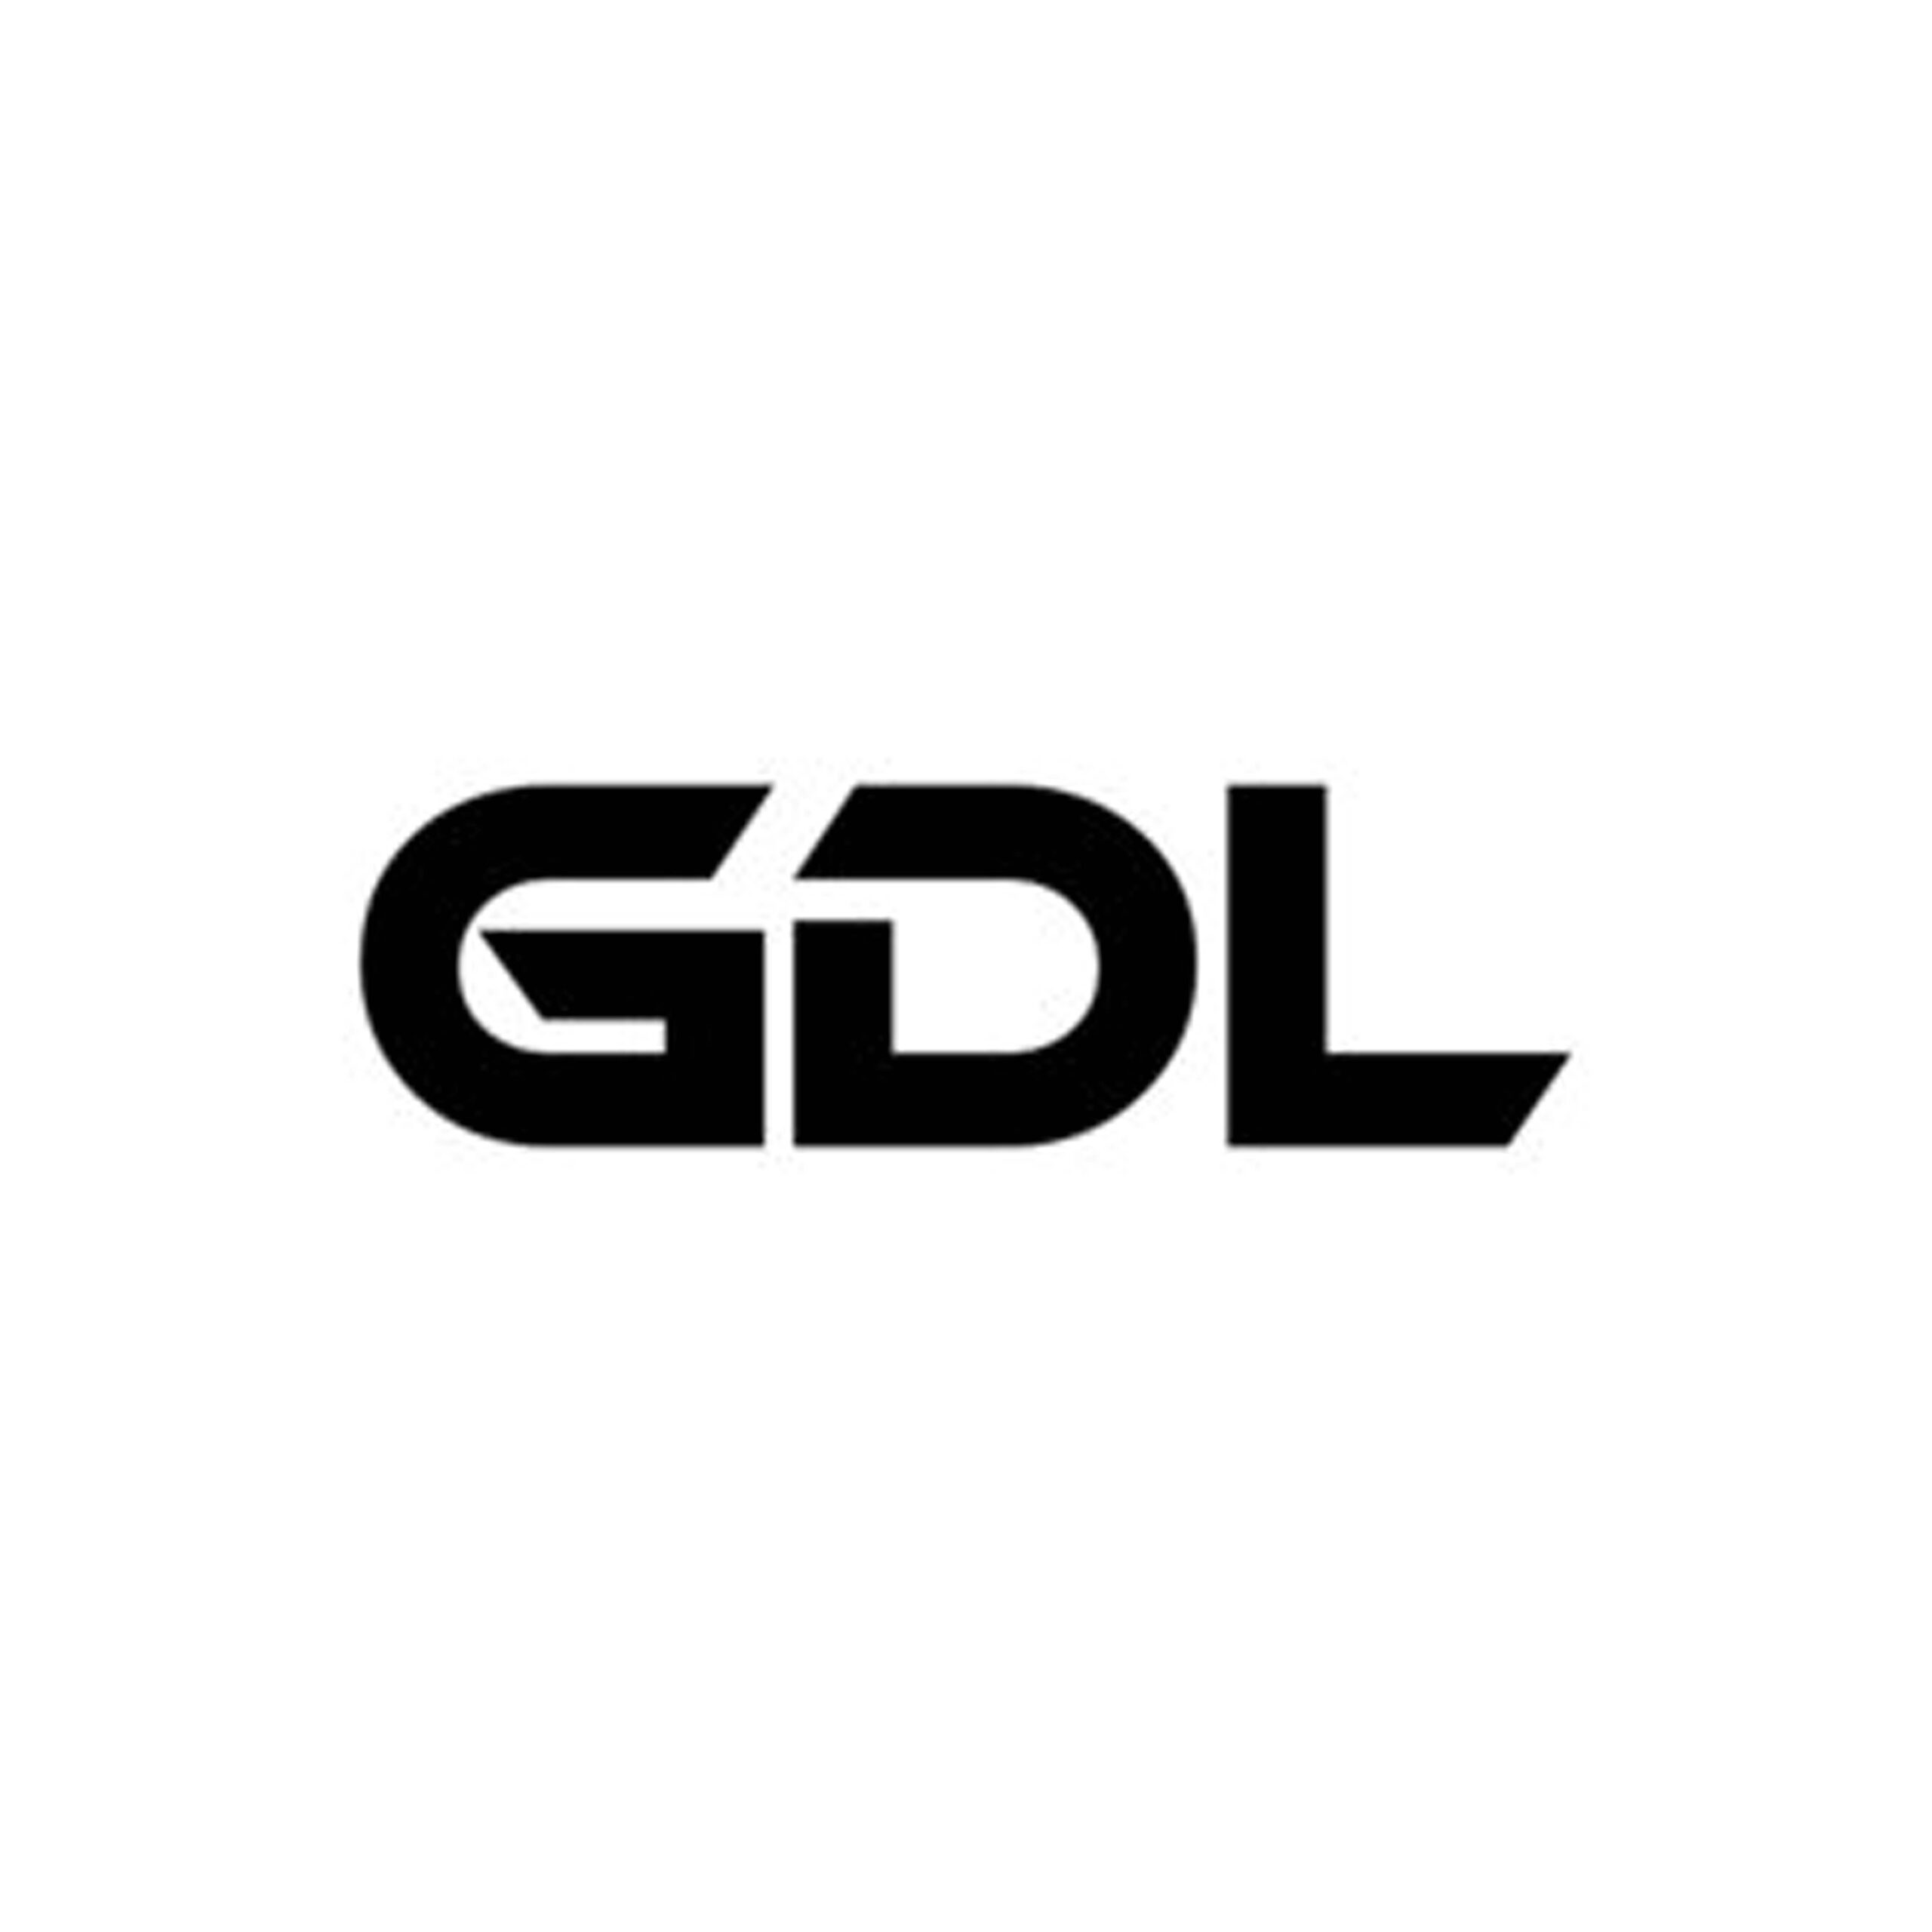 Gdl